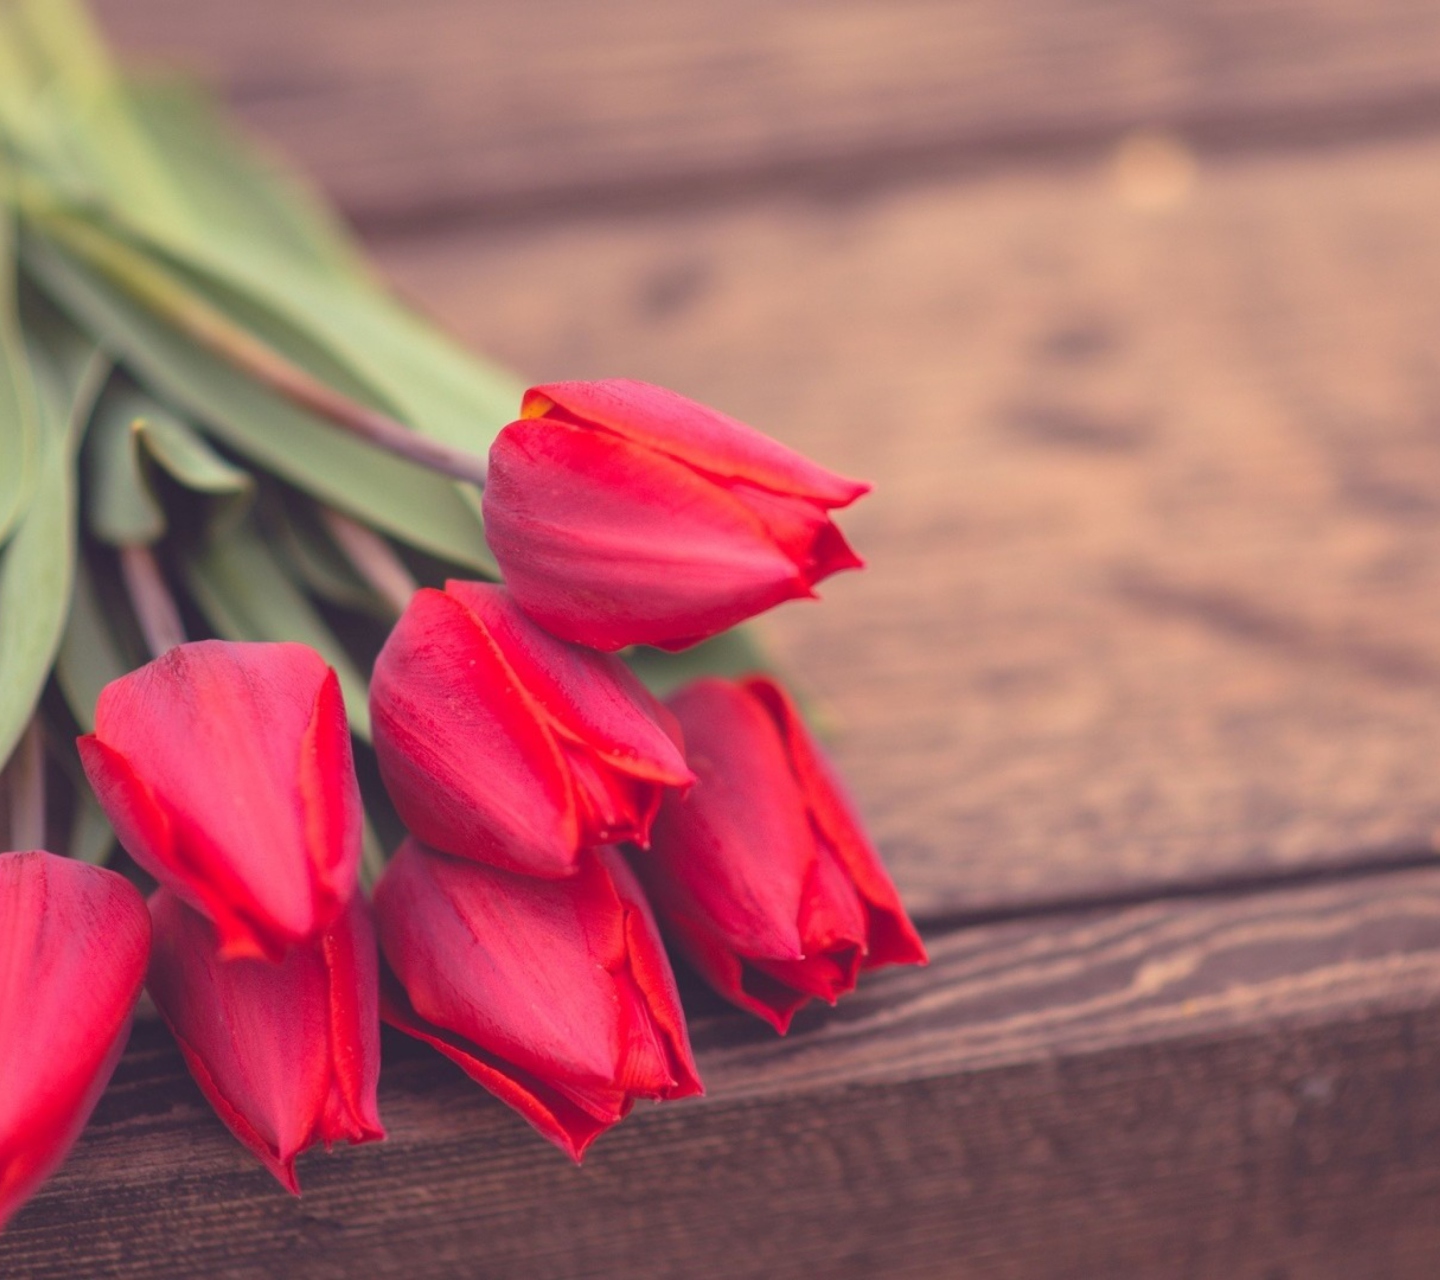 Red Tulip Bouquet On Wooden Bench wallpaper 1440x1280